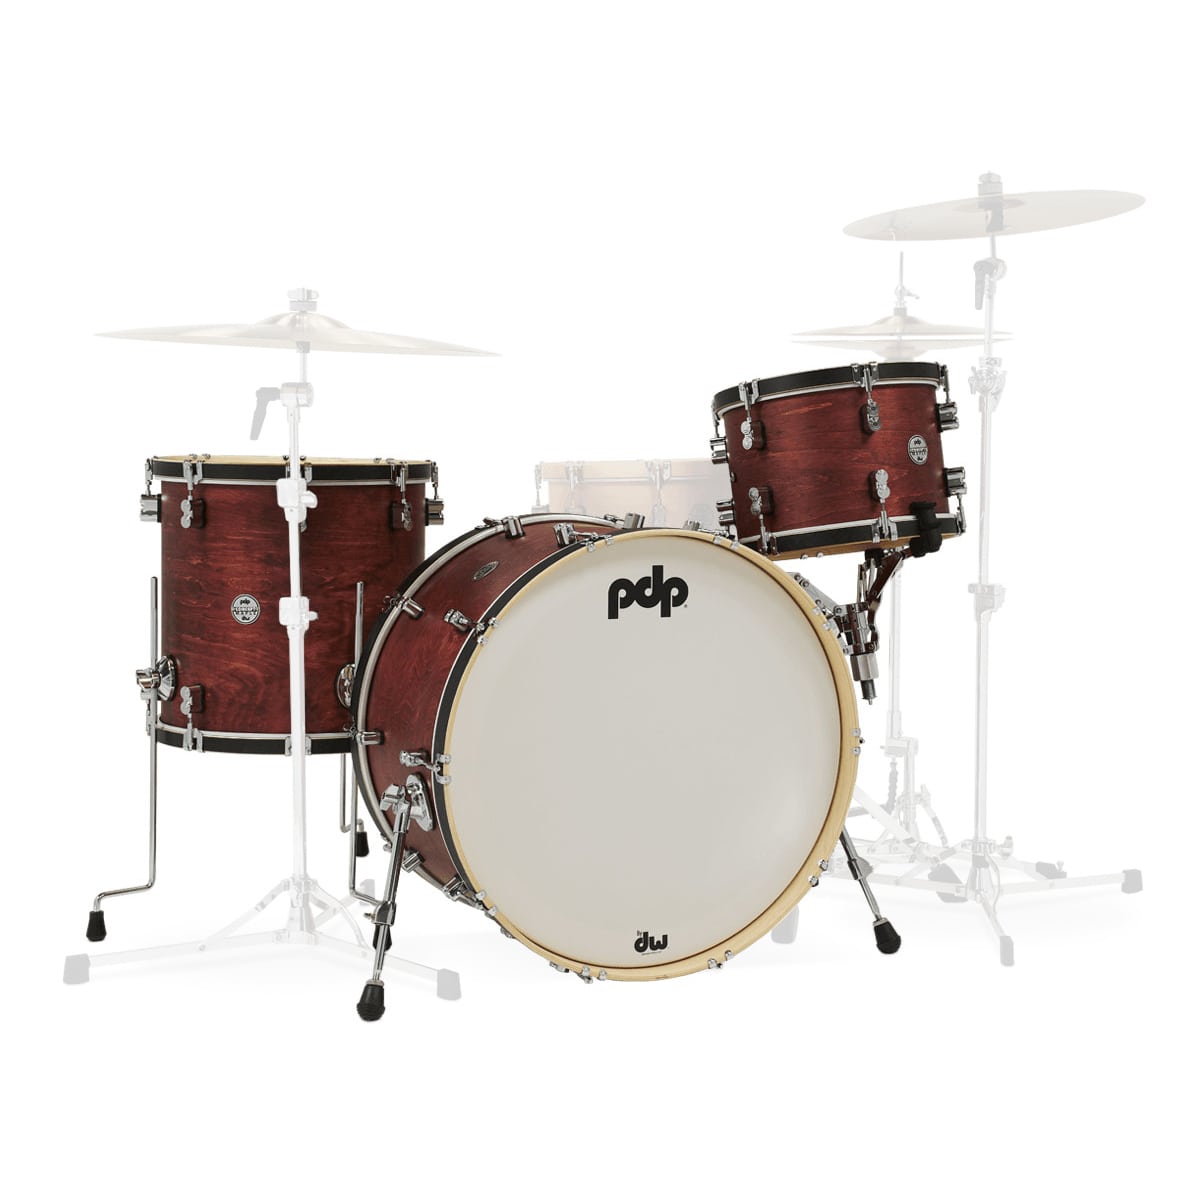 PDP BY DW CONCEPT CLASSIC WOOD HOOP 3 SHELLS 24,13,16 OX BLOOD STAIN - PDCC2413OB